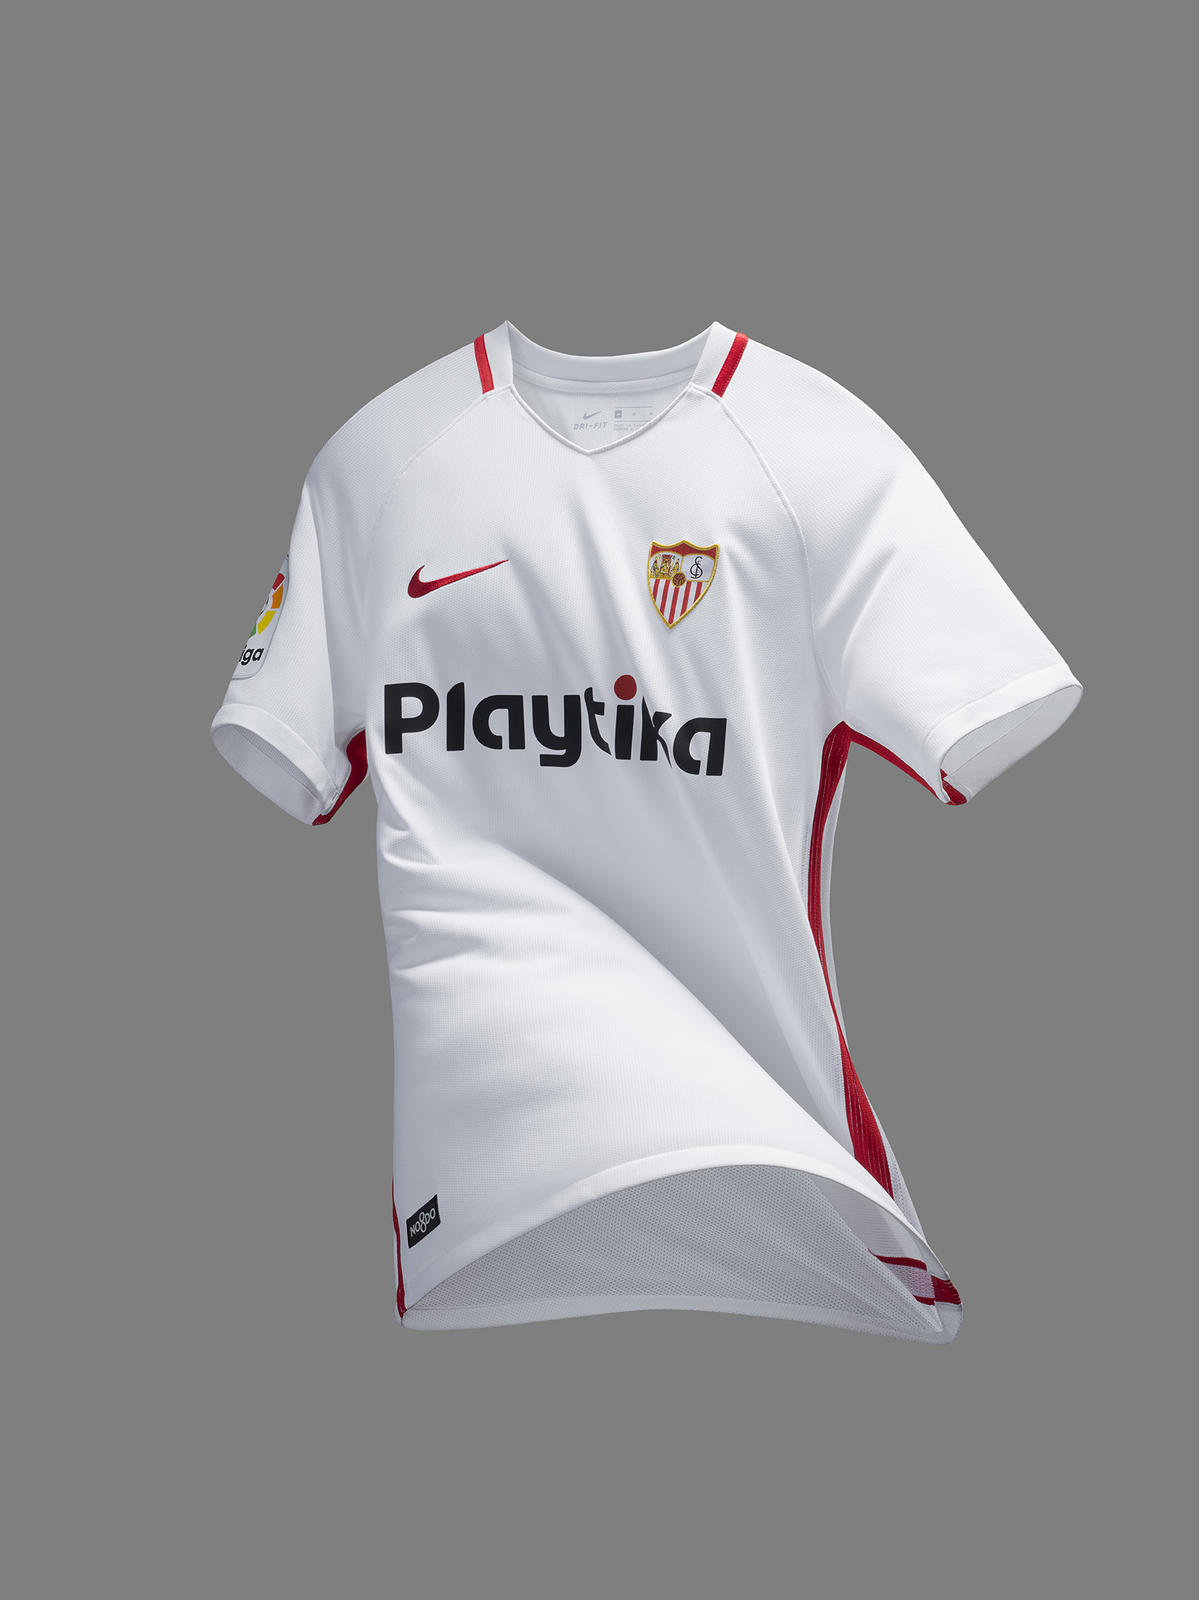 Sevilla Fc Keeps Its Classic Andalusian Look For 2018/19 - Sevilla 2018 19 Kit , HD Wallpaper & Backgrounds